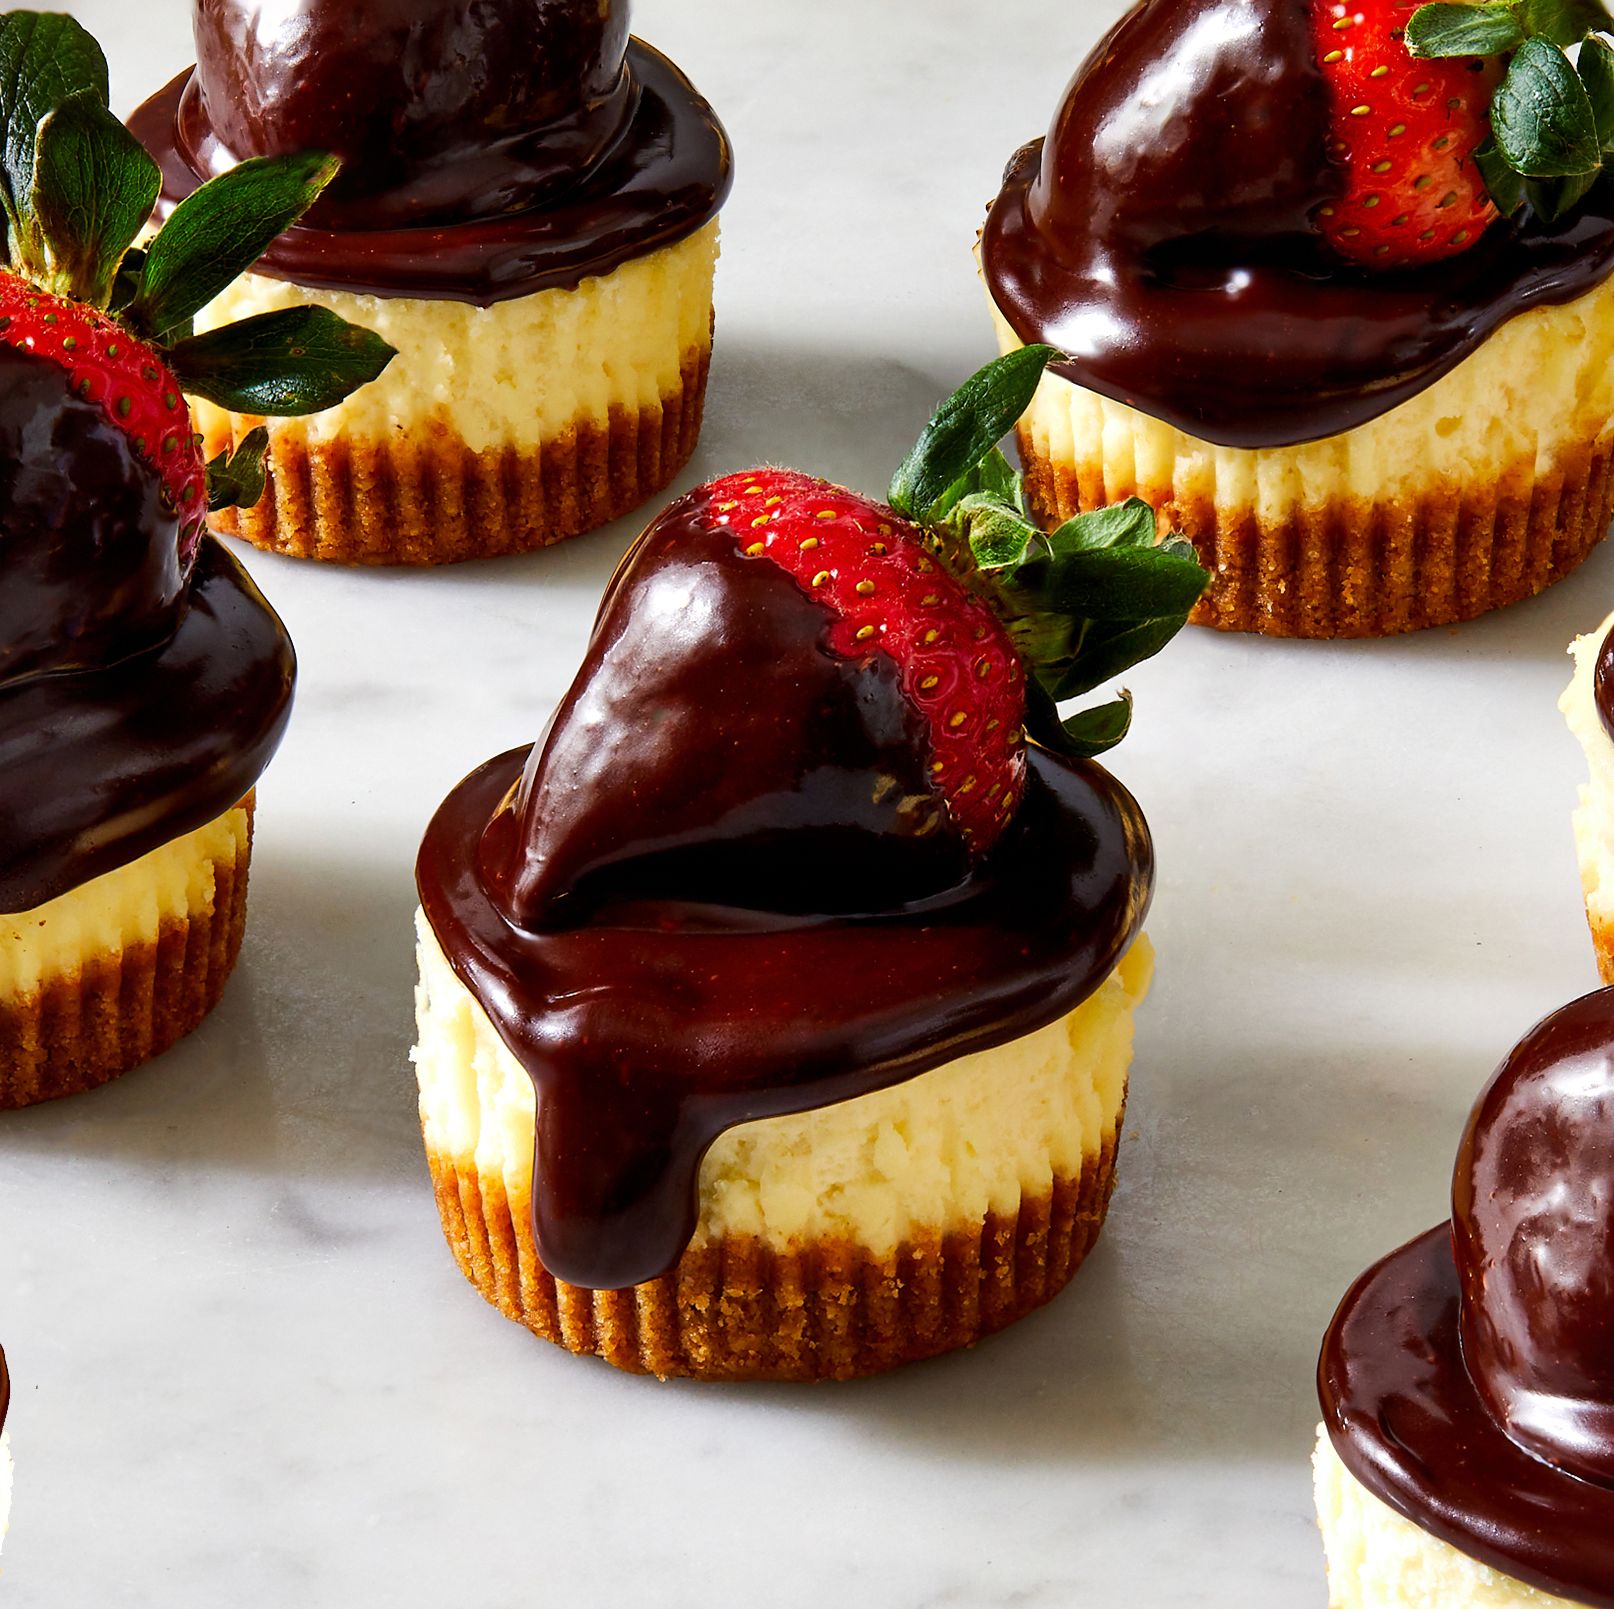 Chocolate-Covered Strawberry Cheesecakes Are The Two-In-One Dessert We're Obsessing Over This Valentine's Day